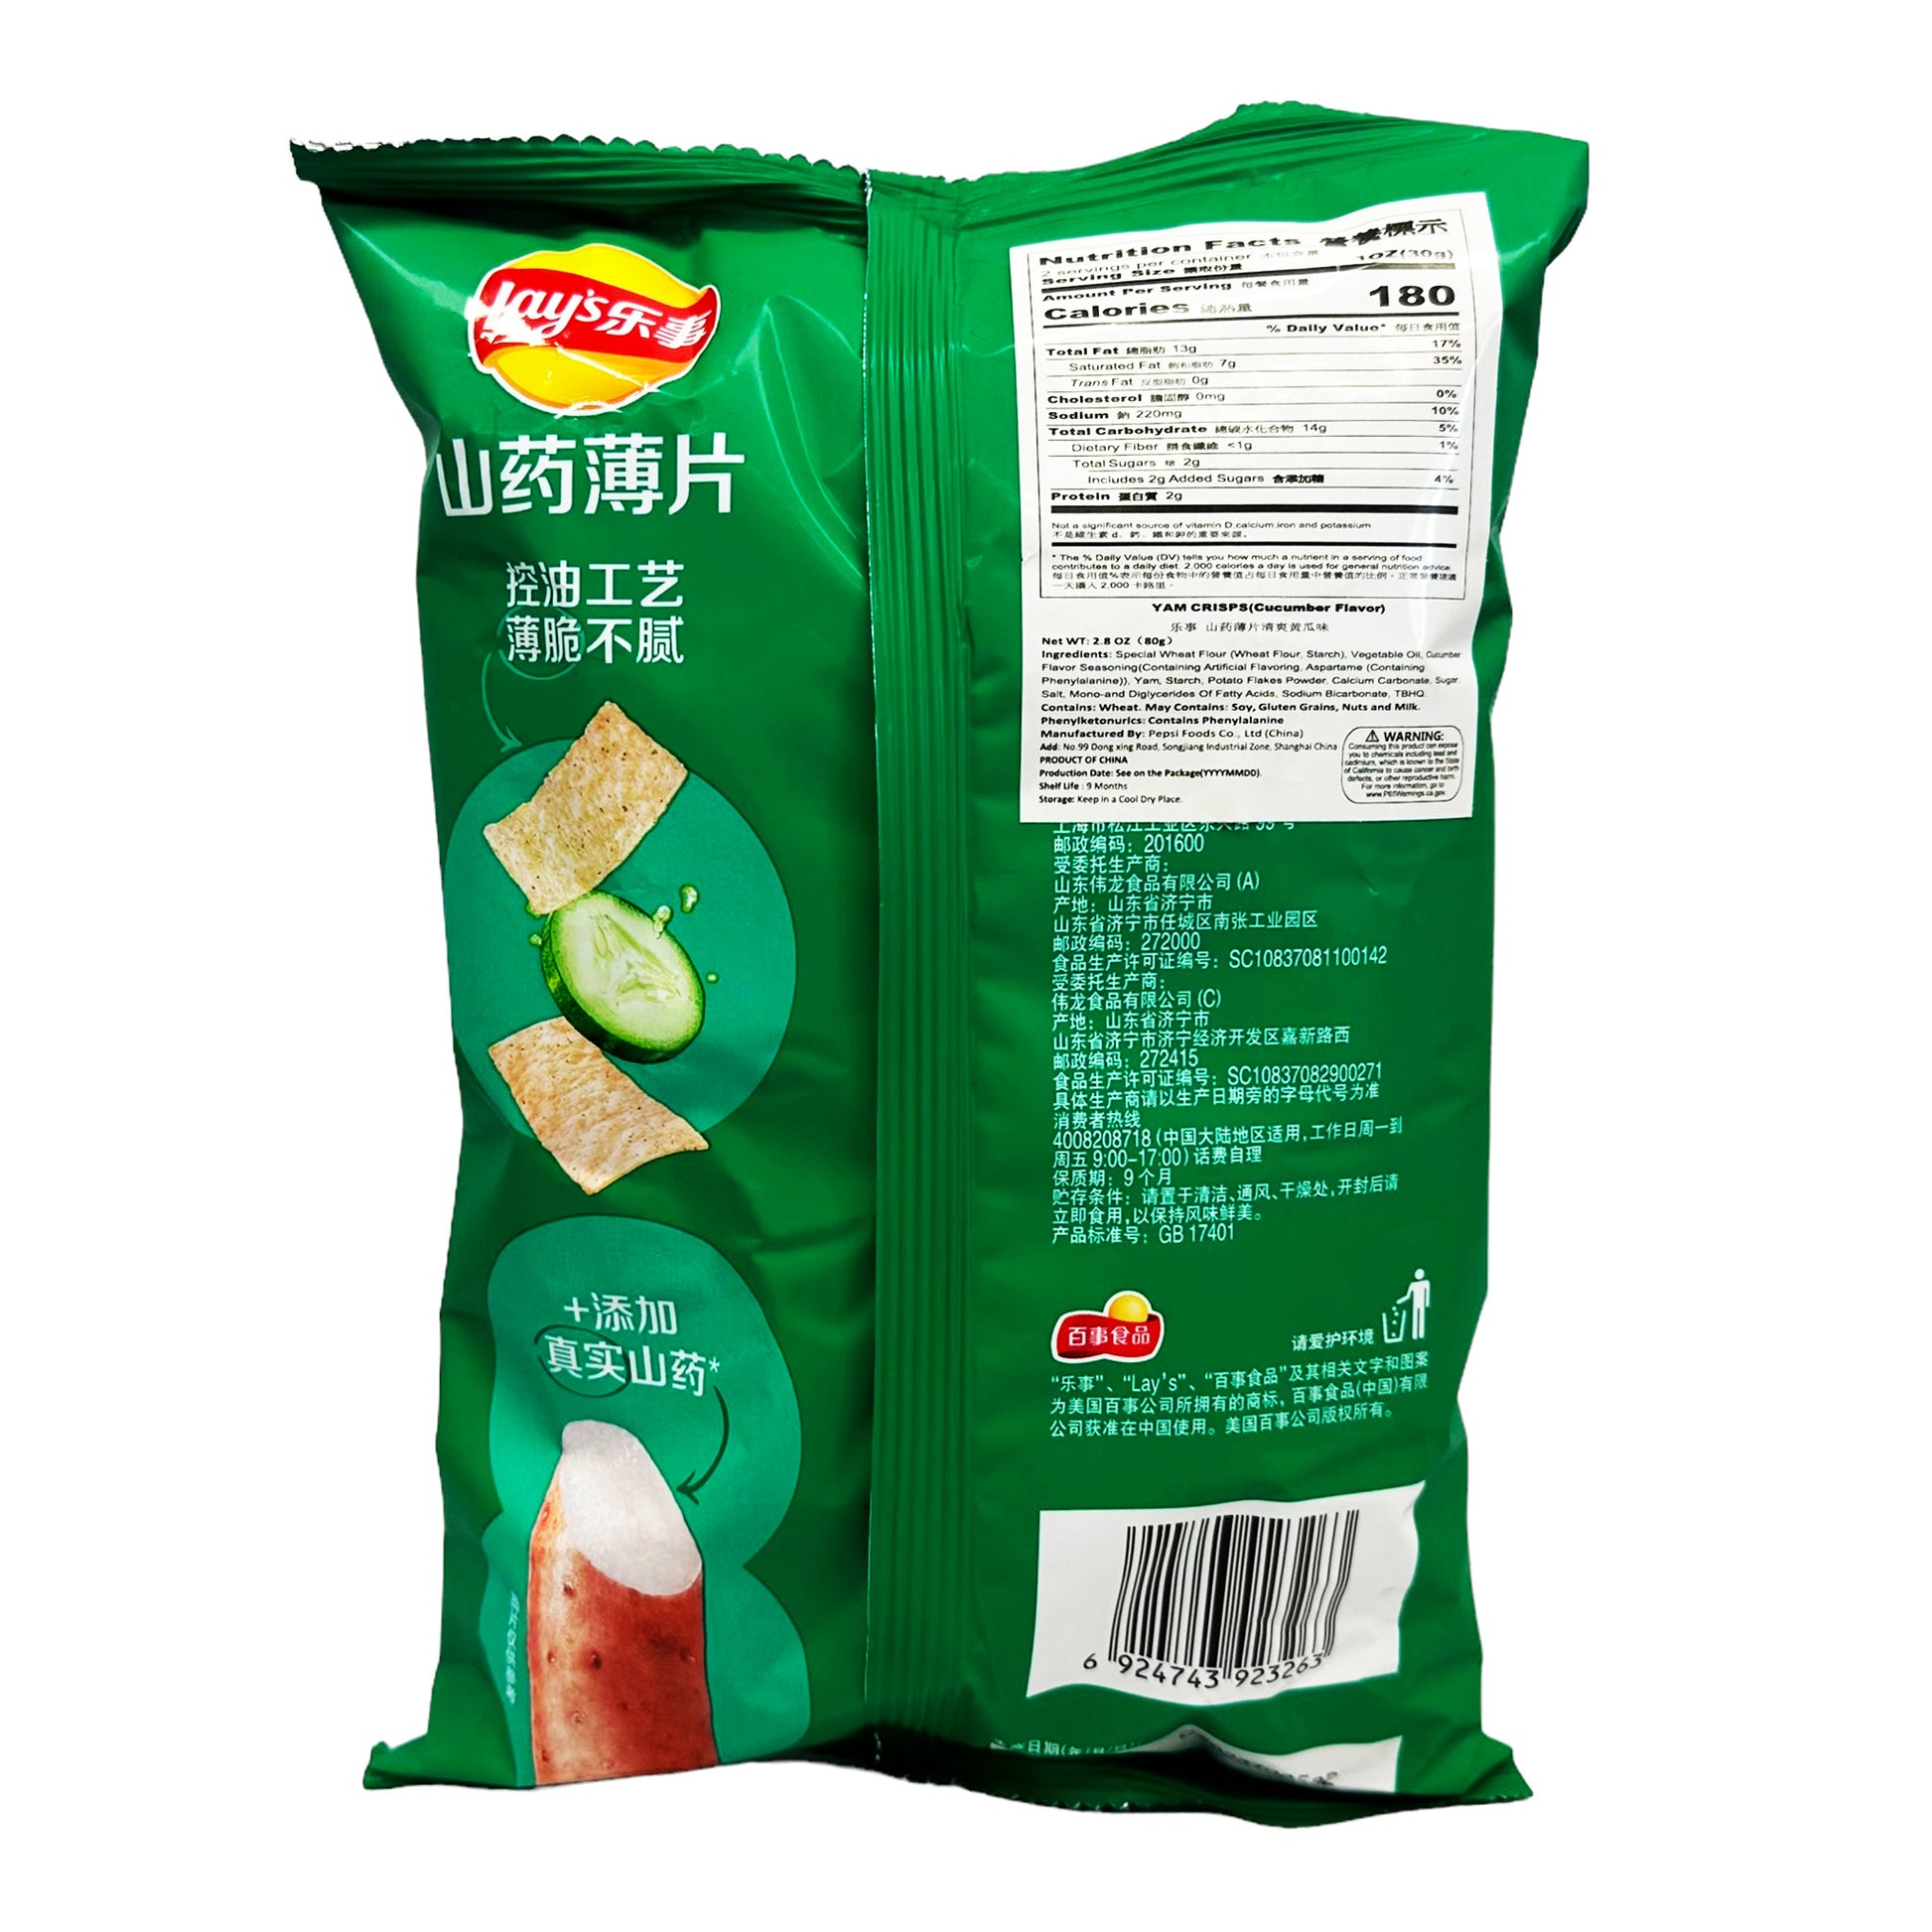 Back graphic image of Lay's Yam Crisps - Cucumber Flavor 2.82oz (80g)